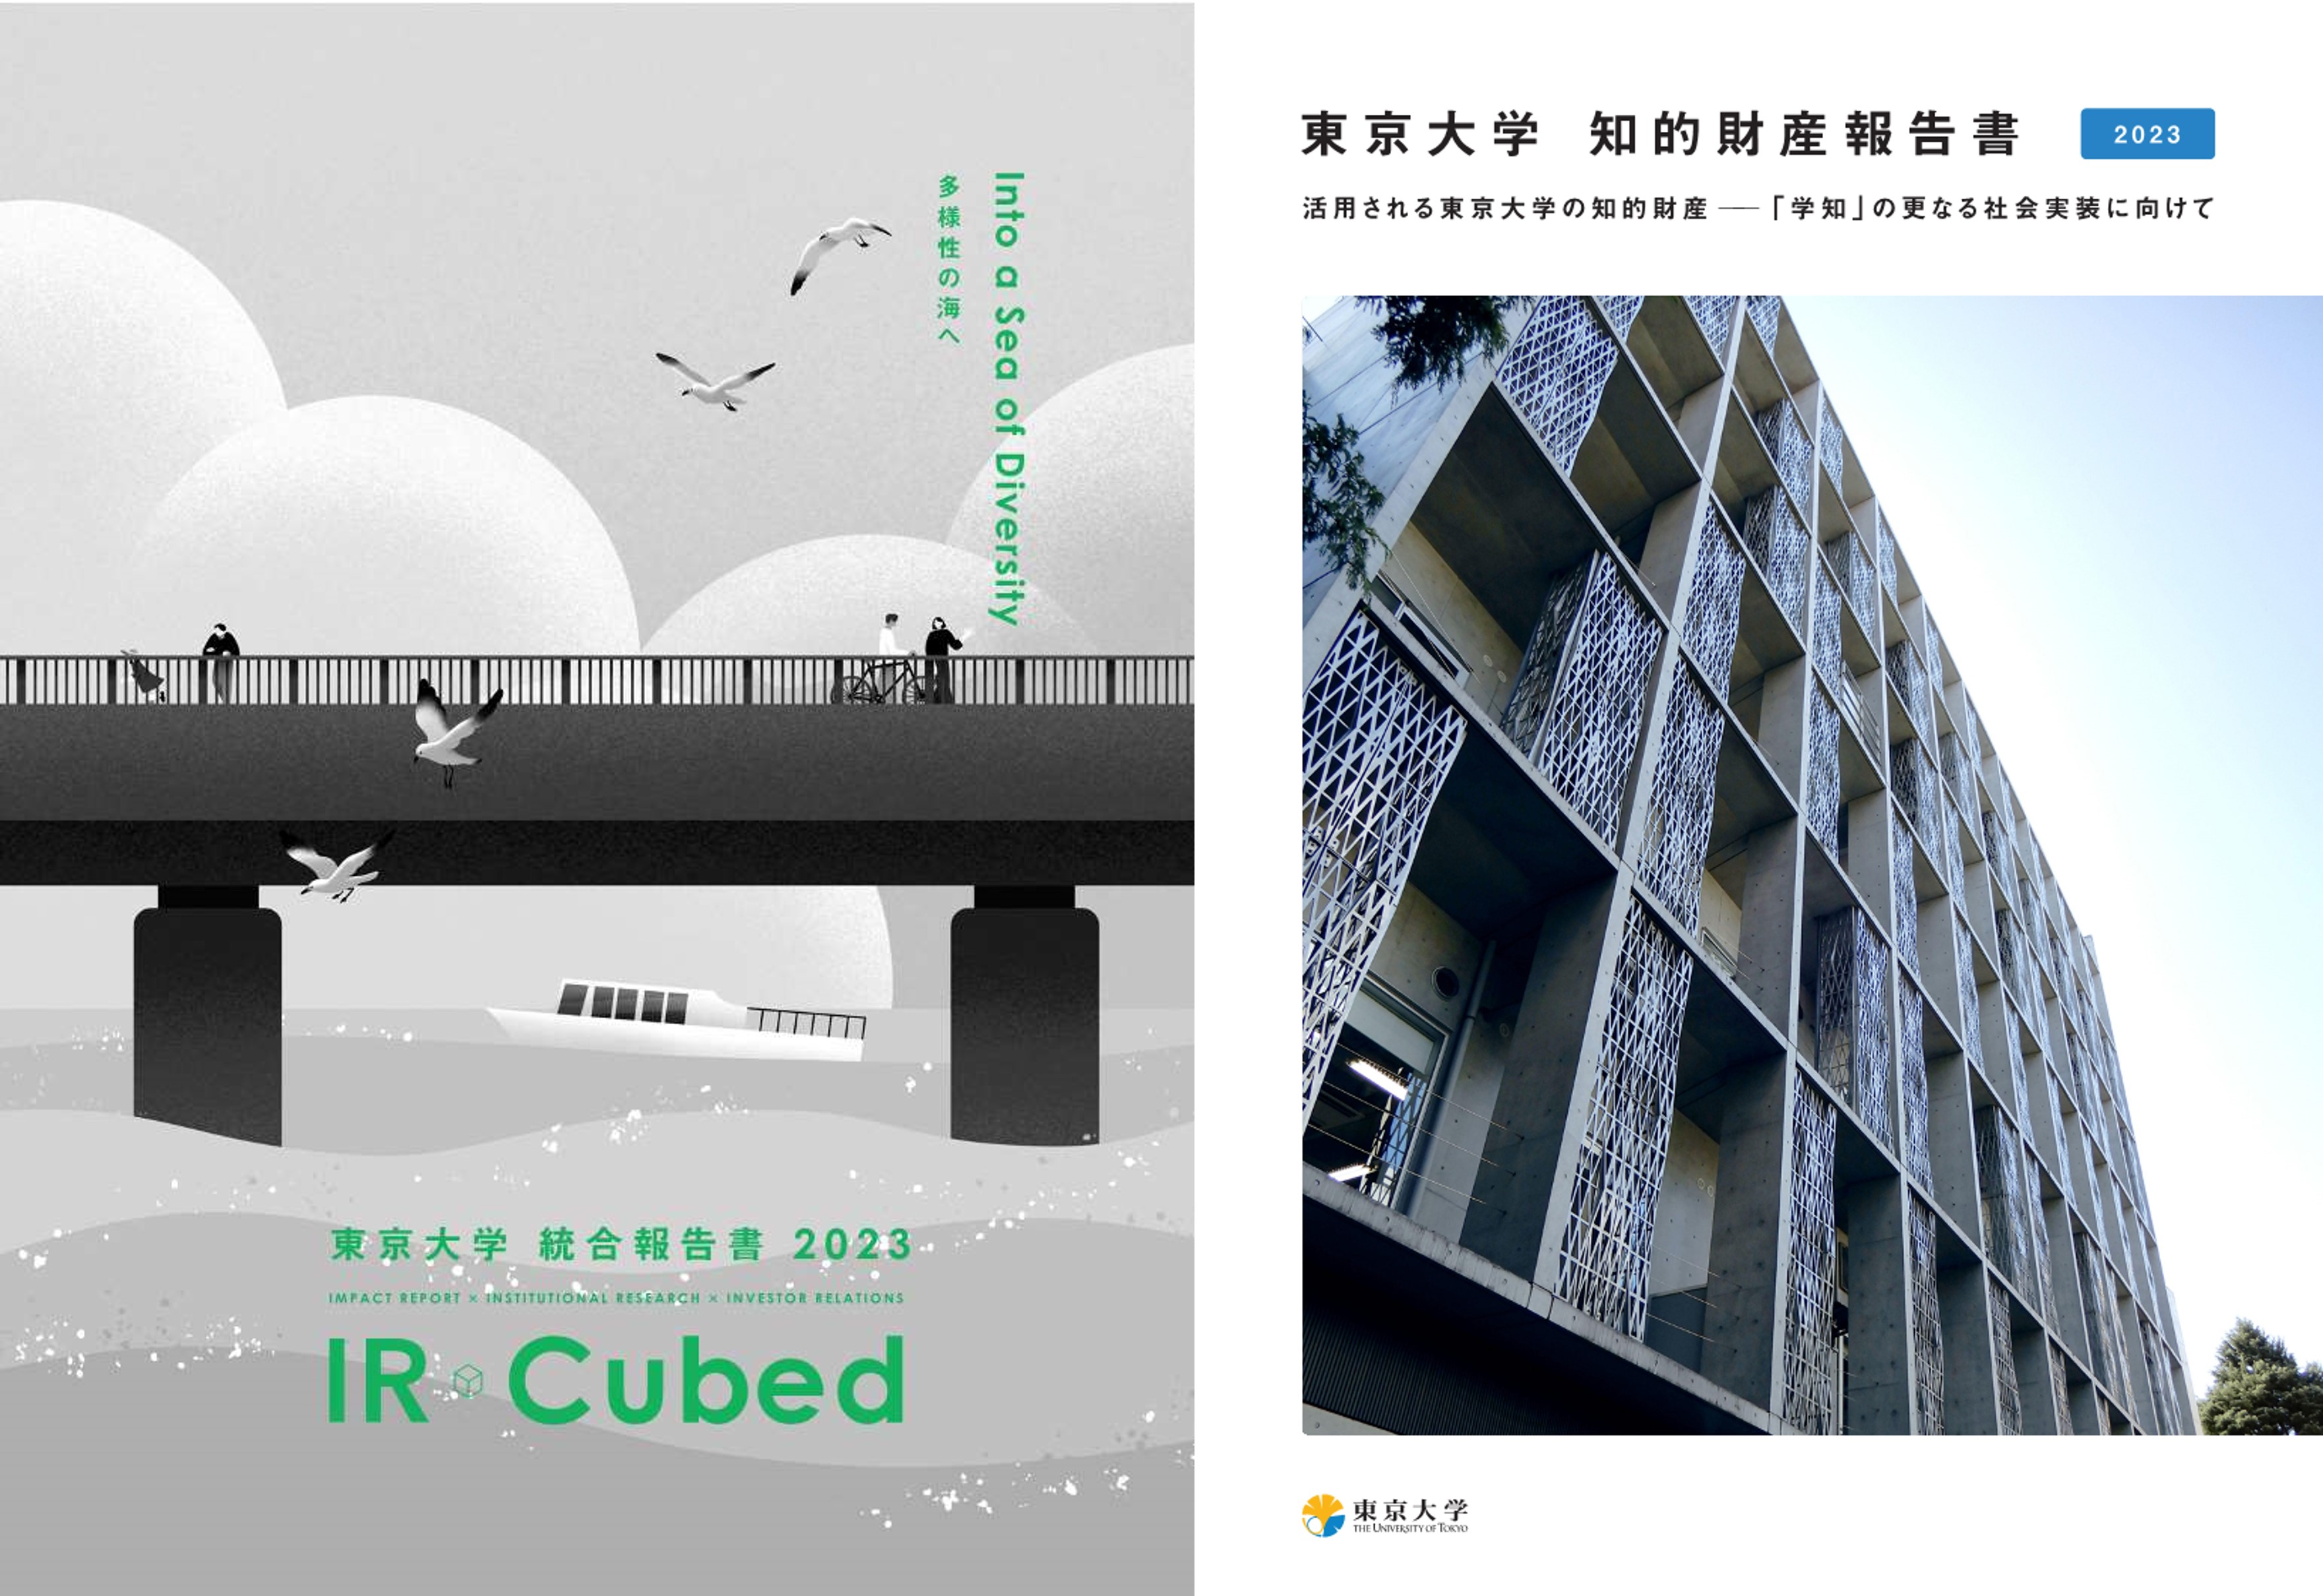 IR Cubed / UTokyo WAY 2023 & Intellectual Property Report 2023 were published